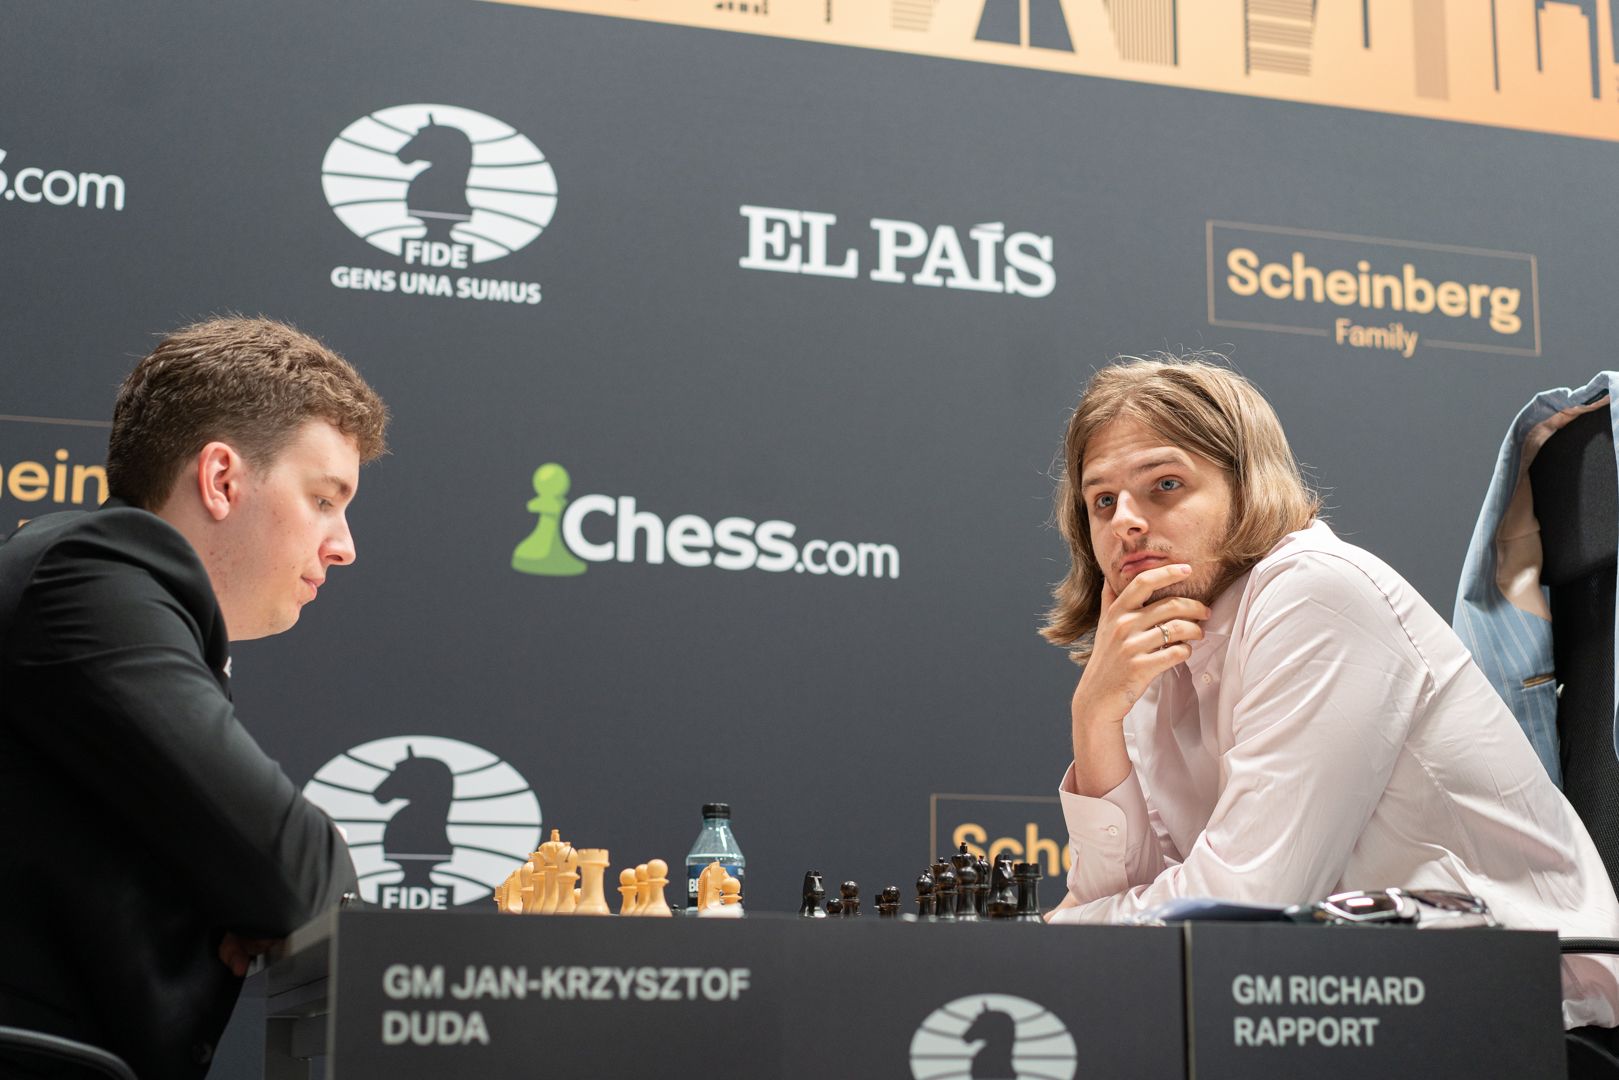 FIDE Candidates Chess Tournament 2022: All The Information 